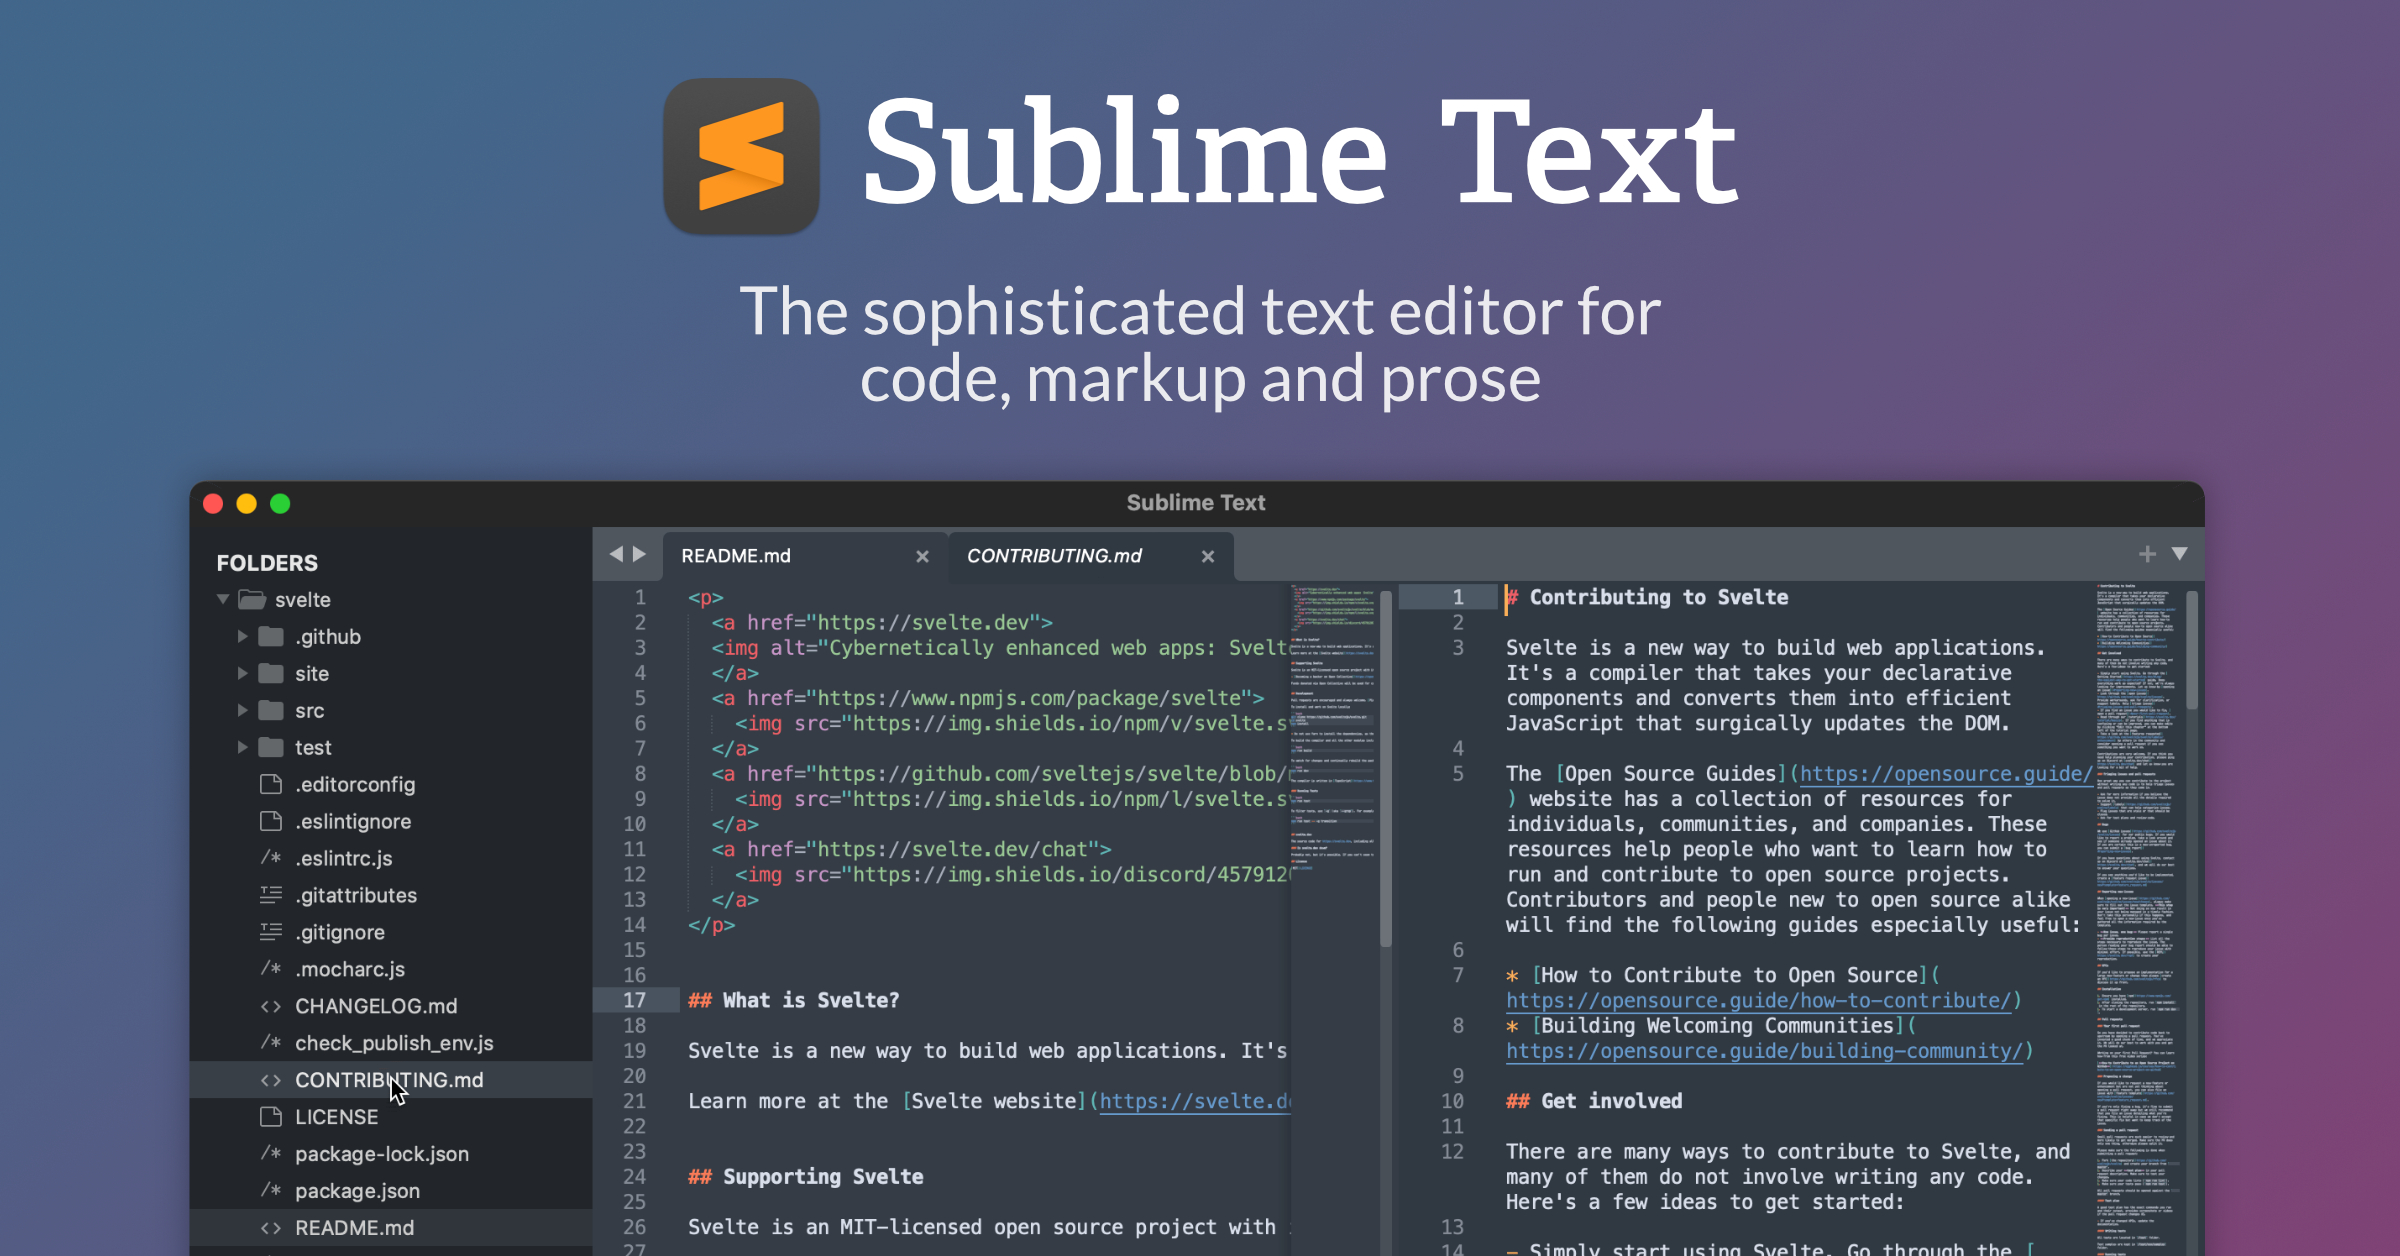 Sublime Text - the sophisticated text editor for code, markup and prose